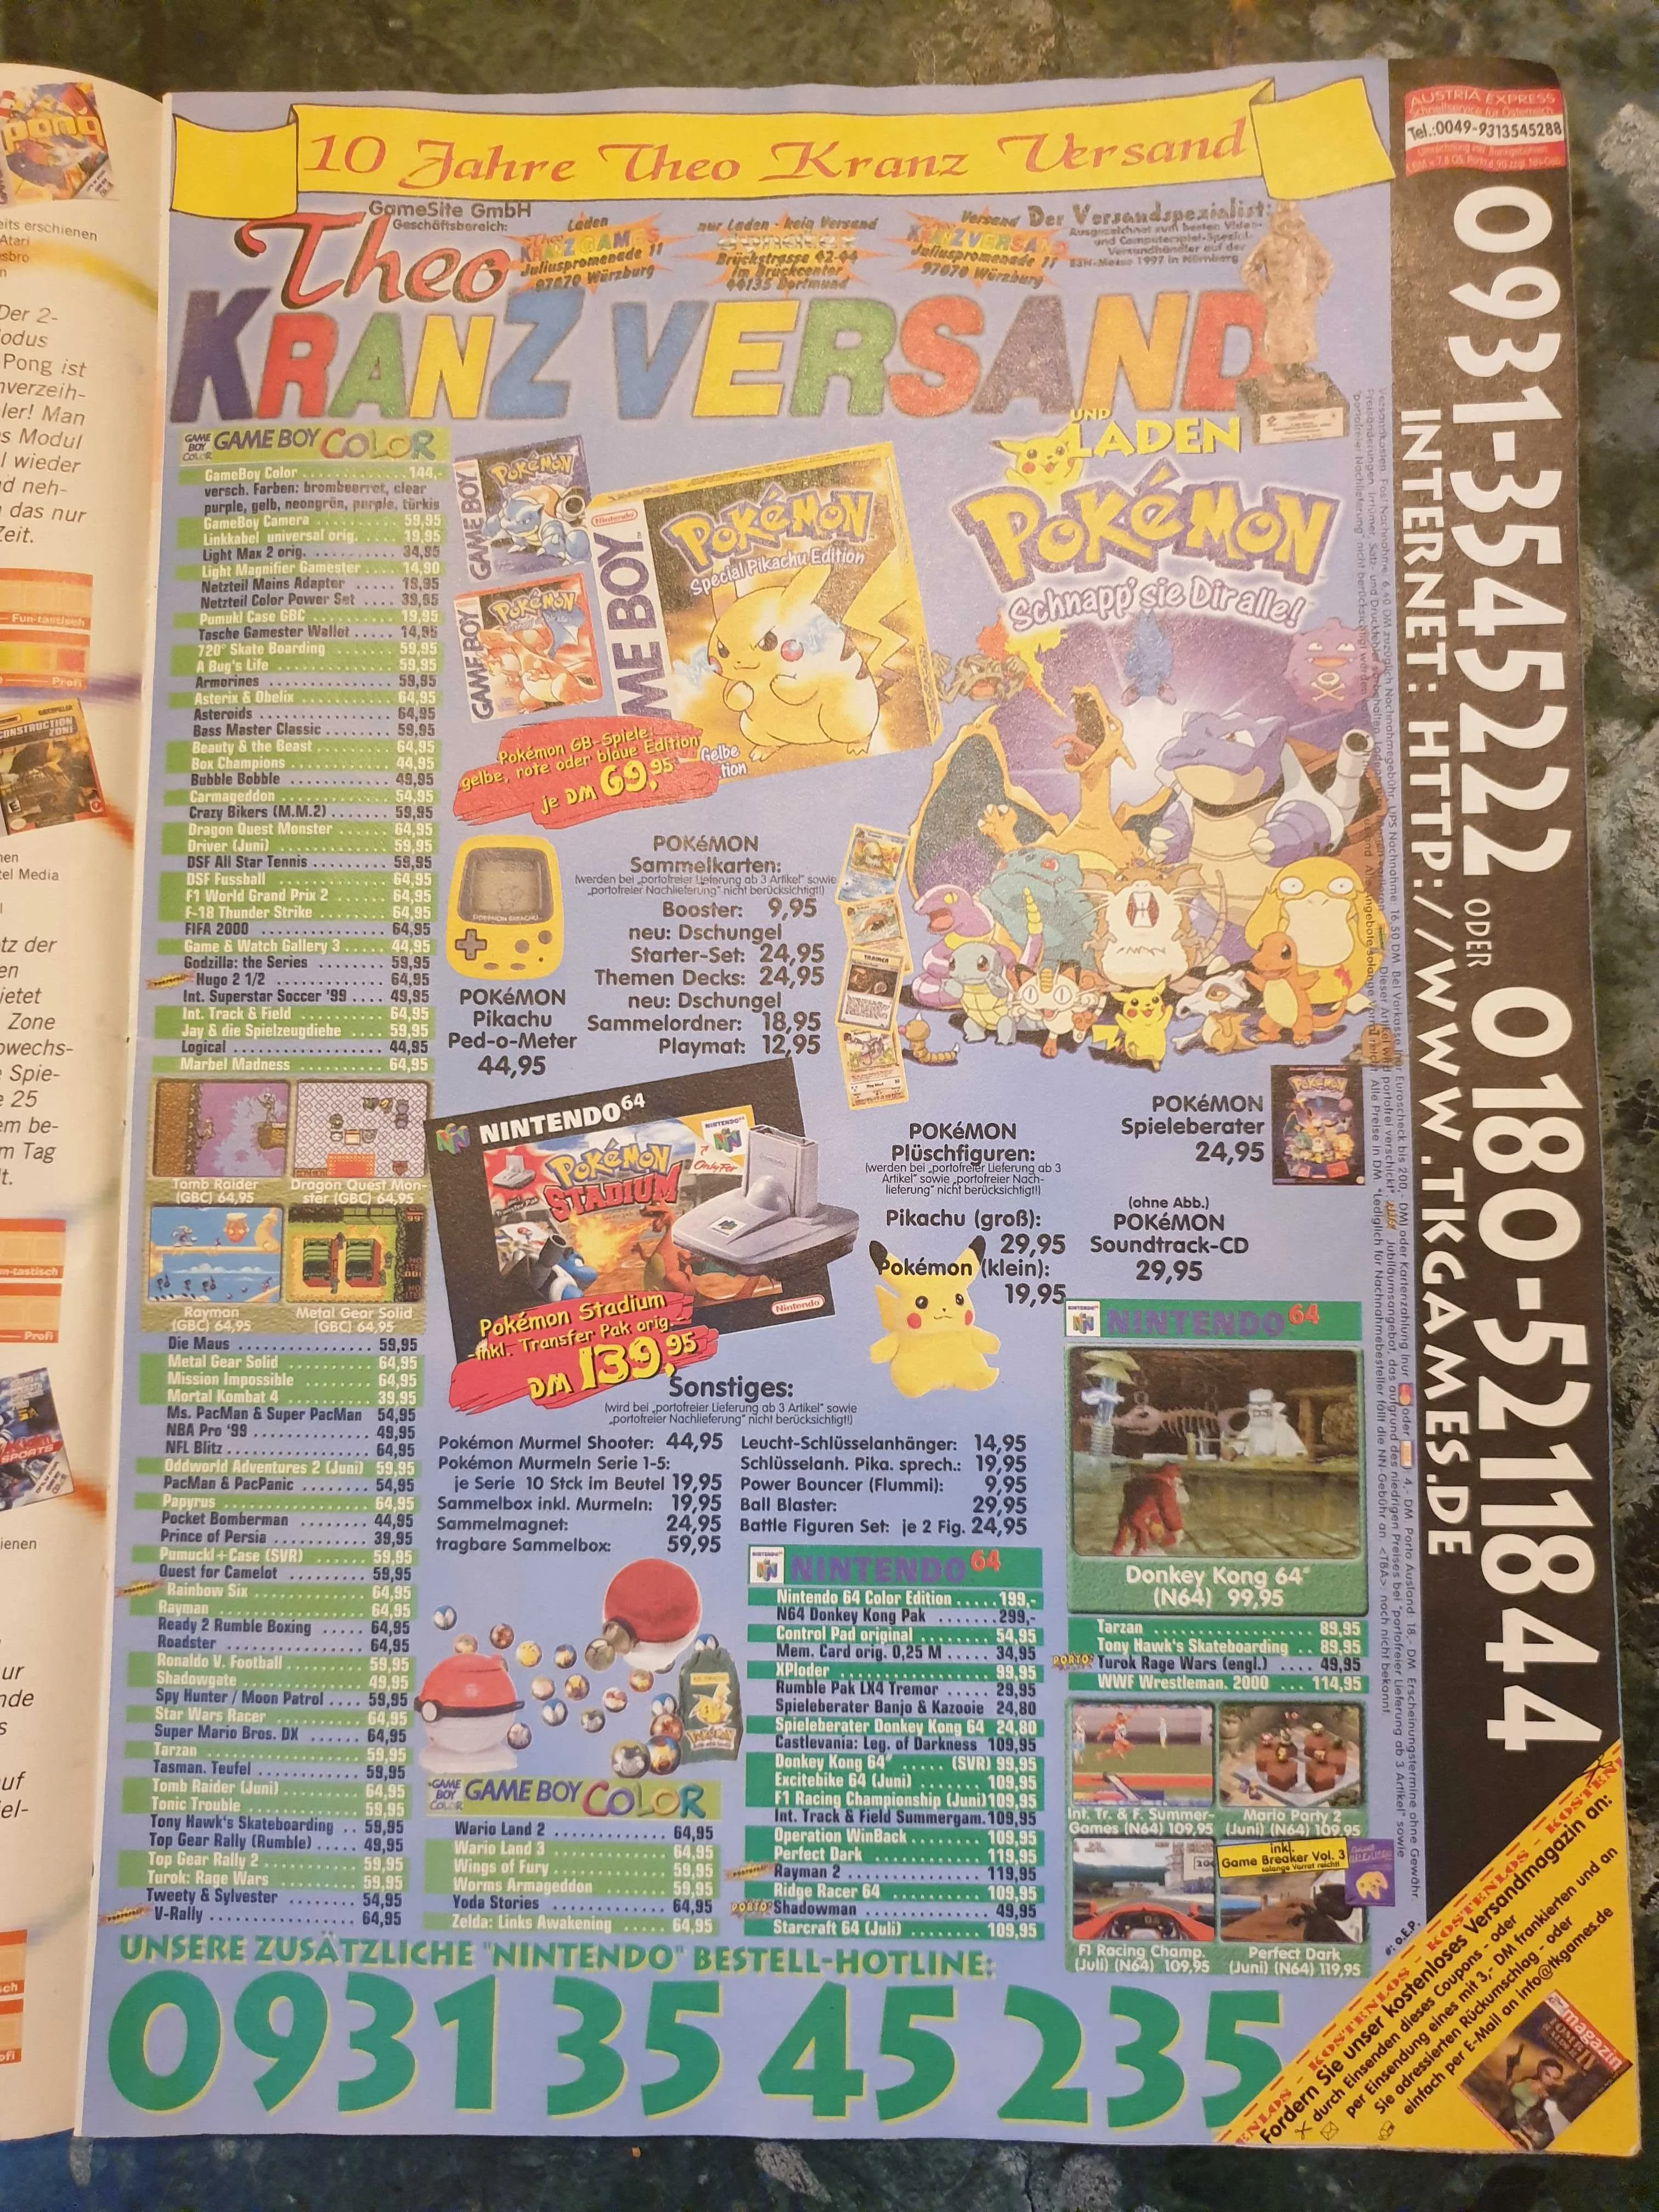 Order page from old Nintendo Magazine with Online Shop